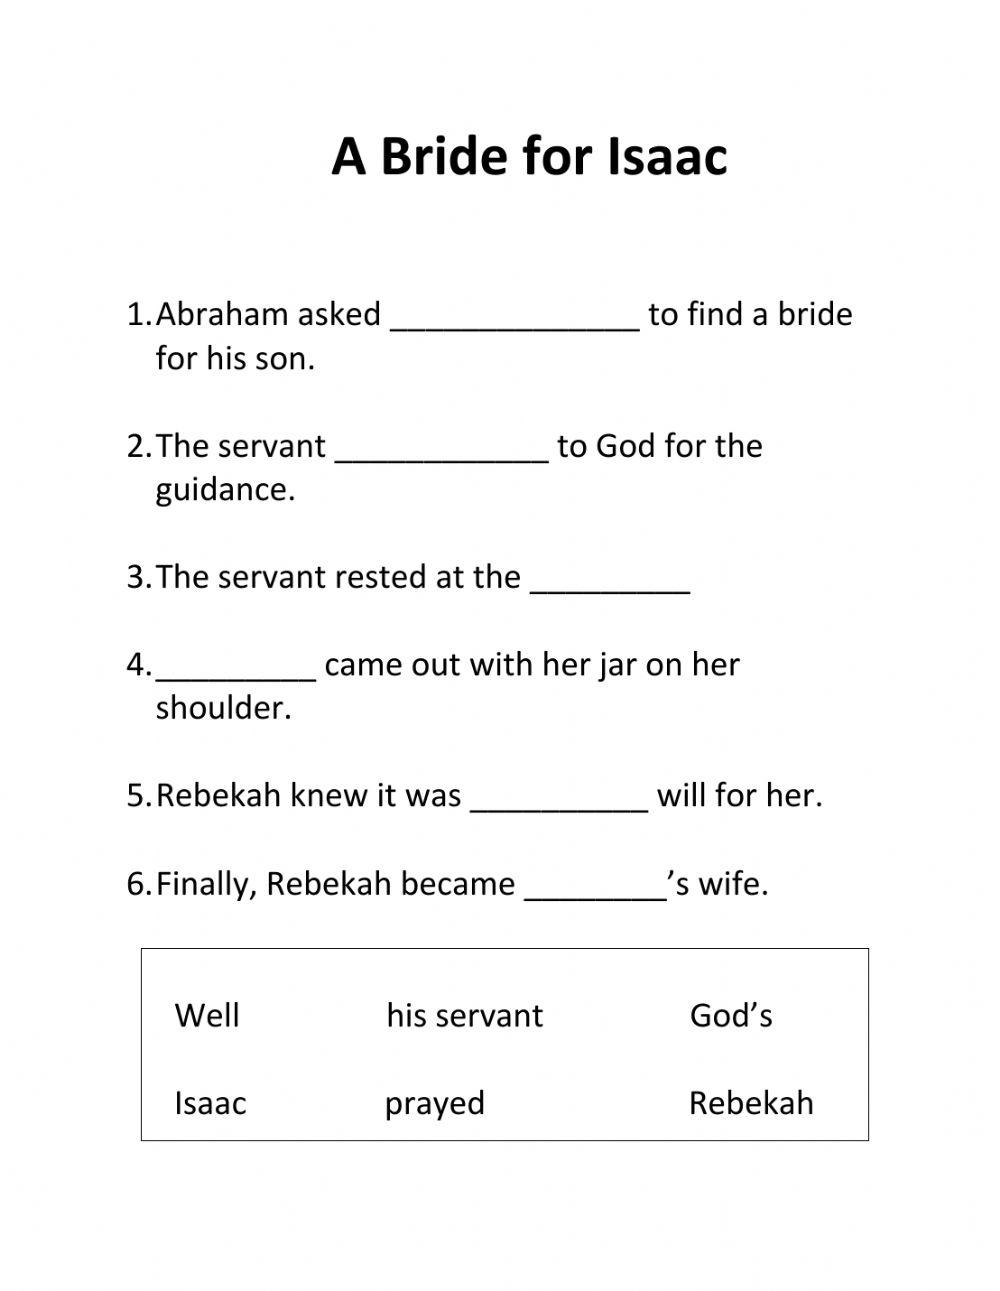 A Bride for Isaac